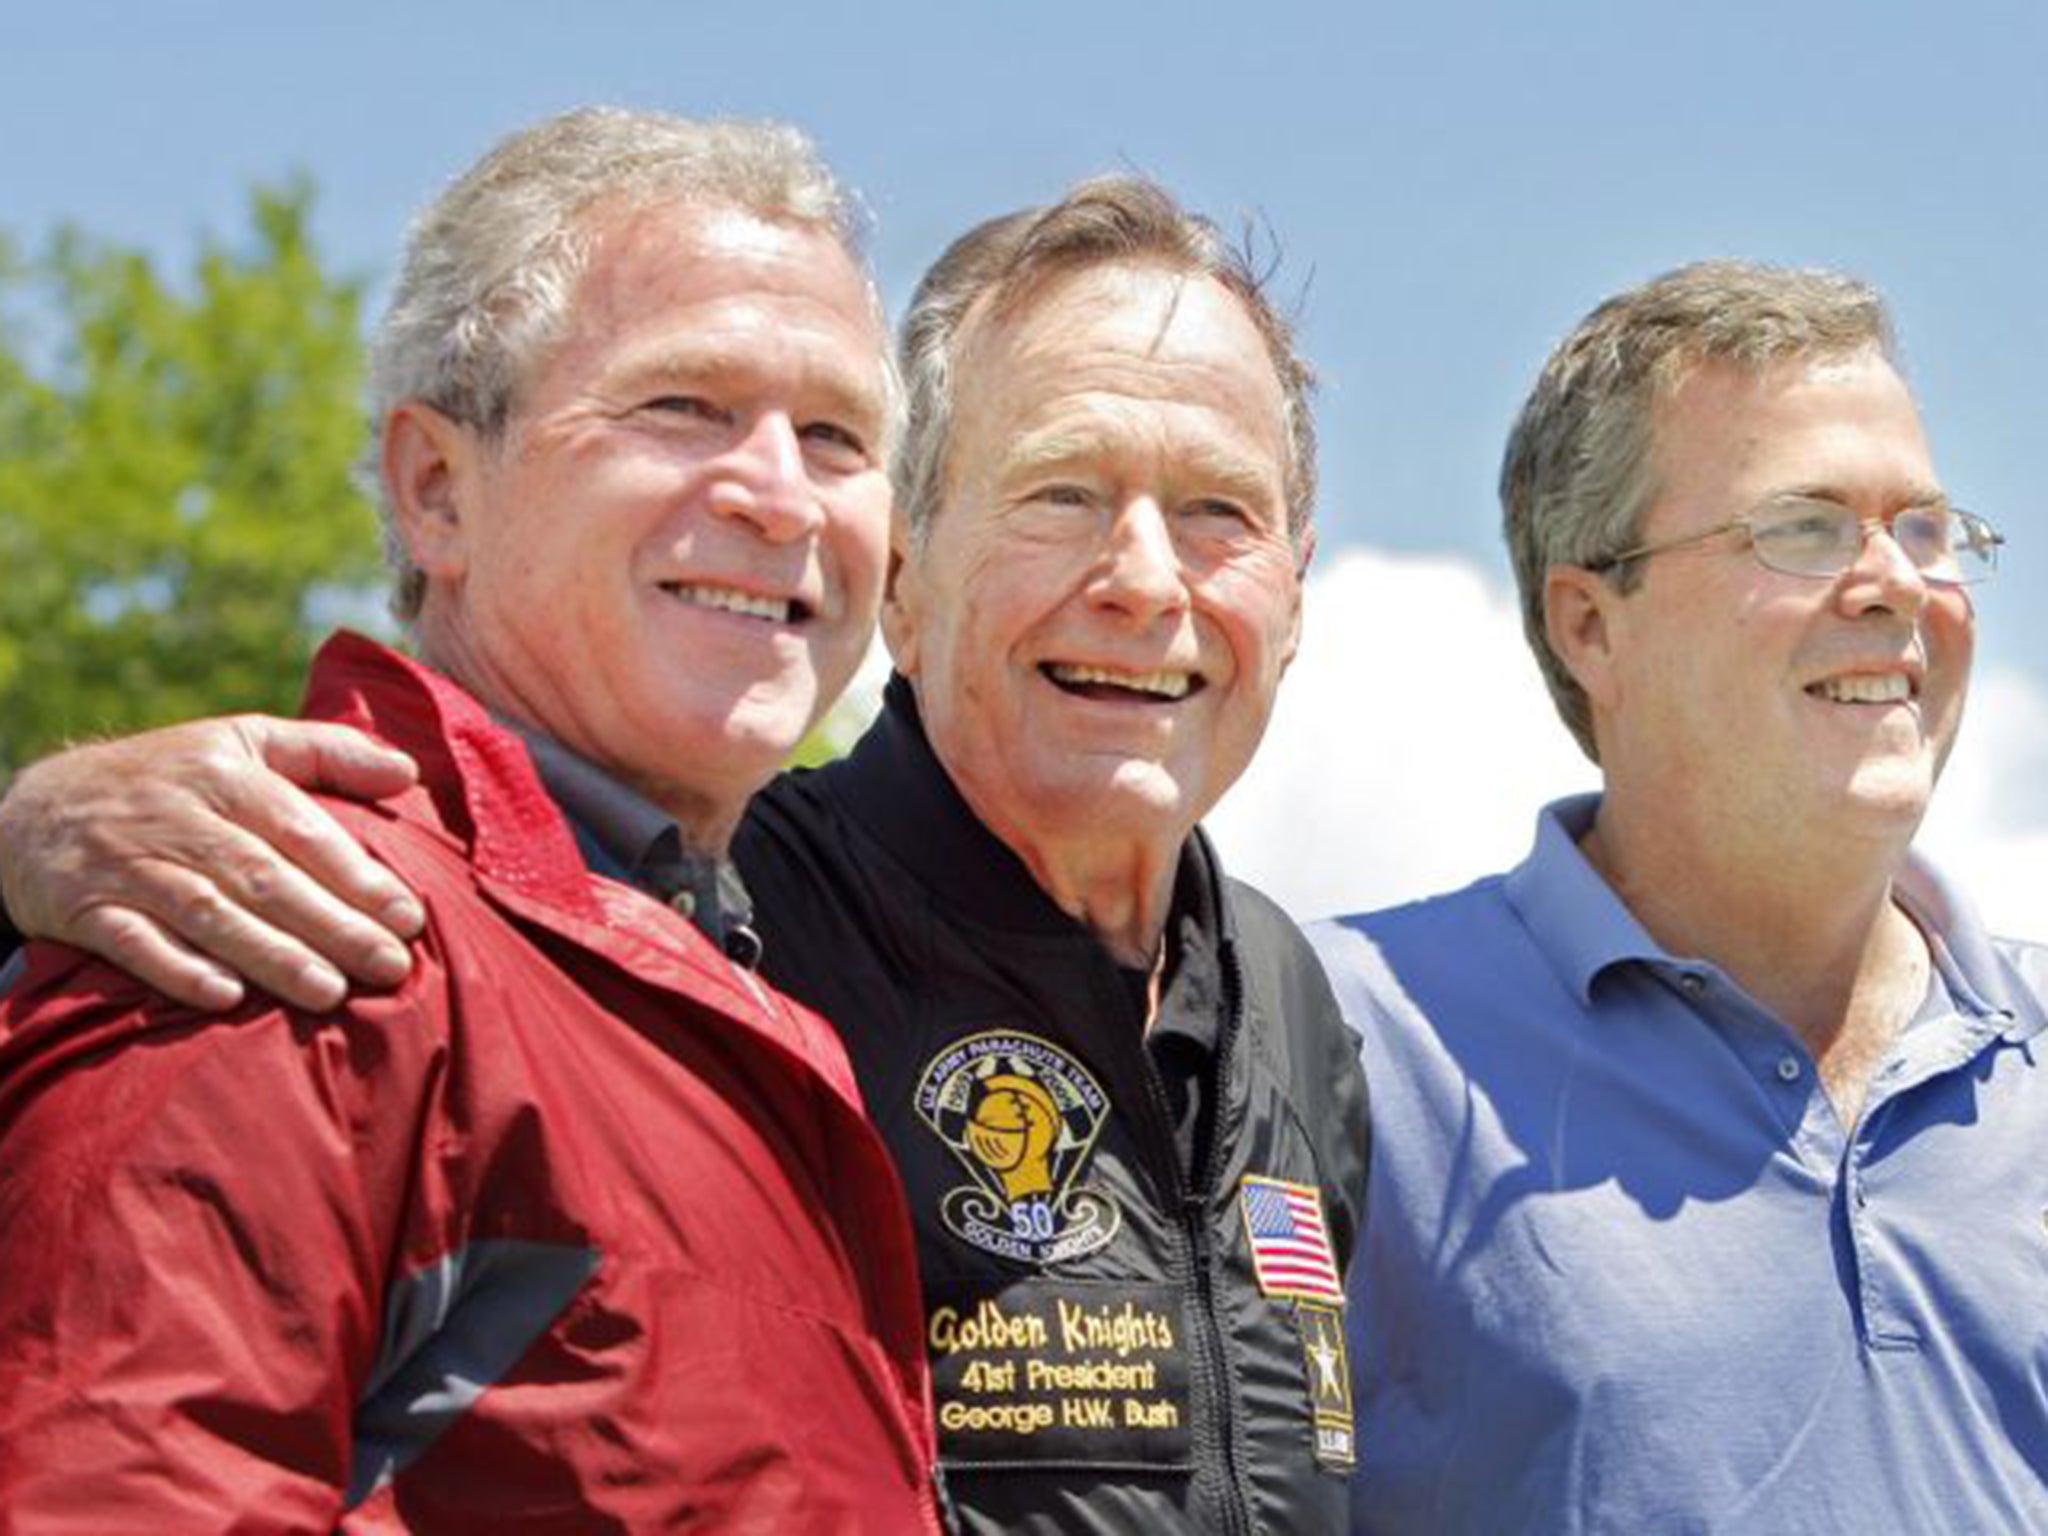 Political dynasty: George HW Bush with sons George and Jeb